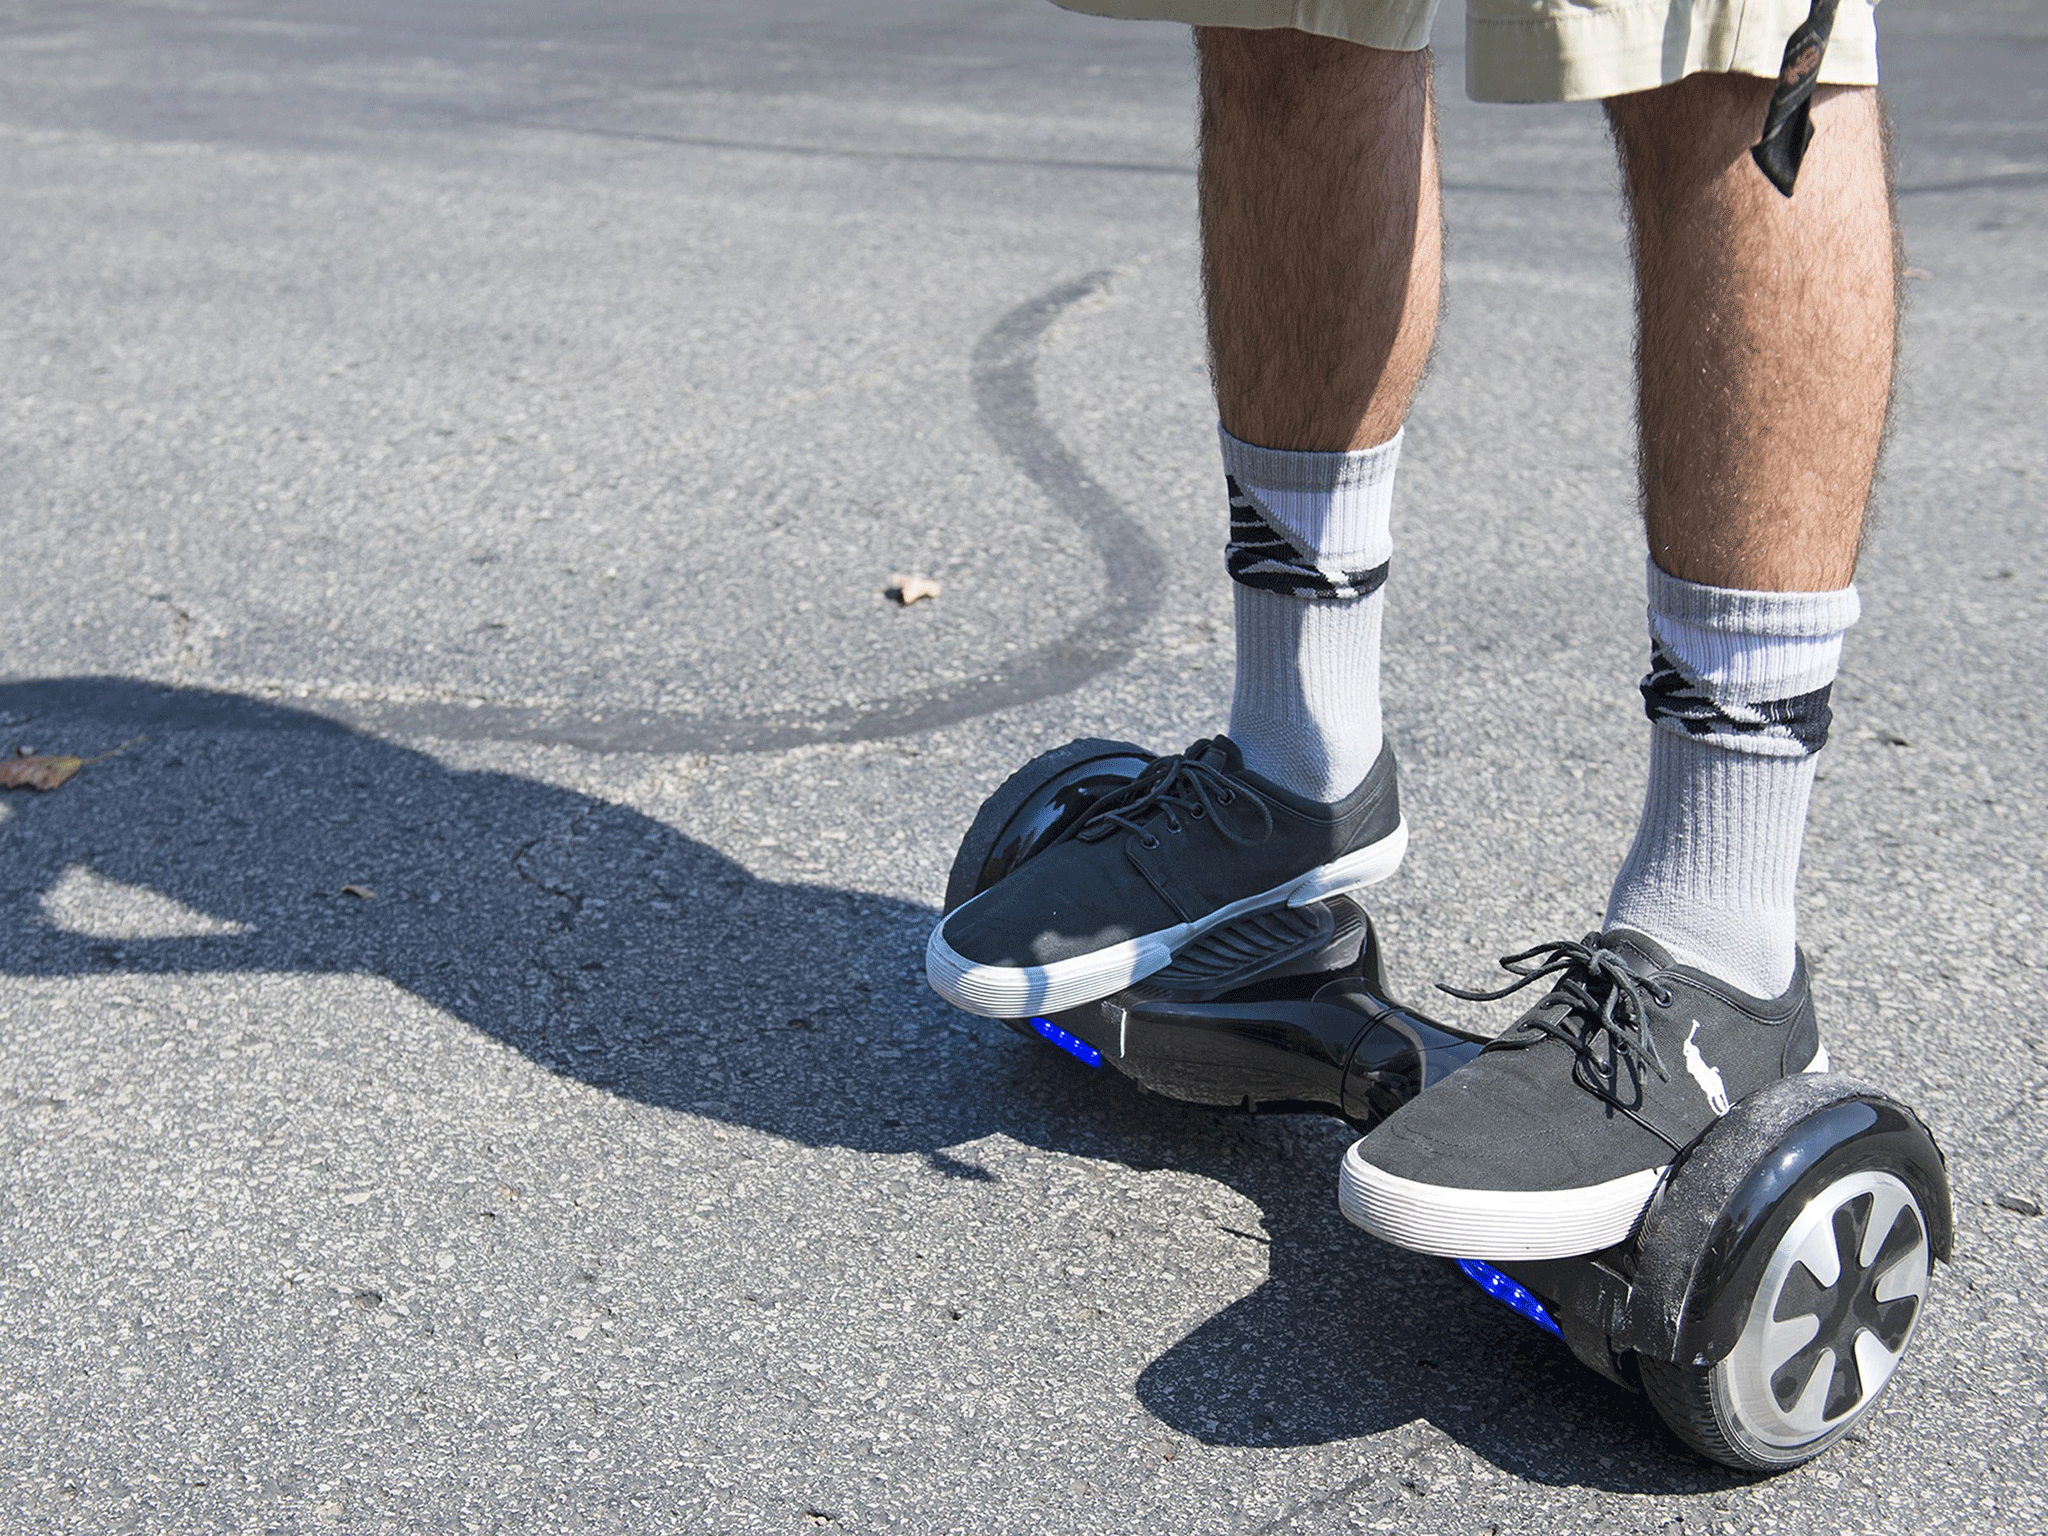 There have now been at least several instances of hoverboards catching fire or exploding in the UK and US